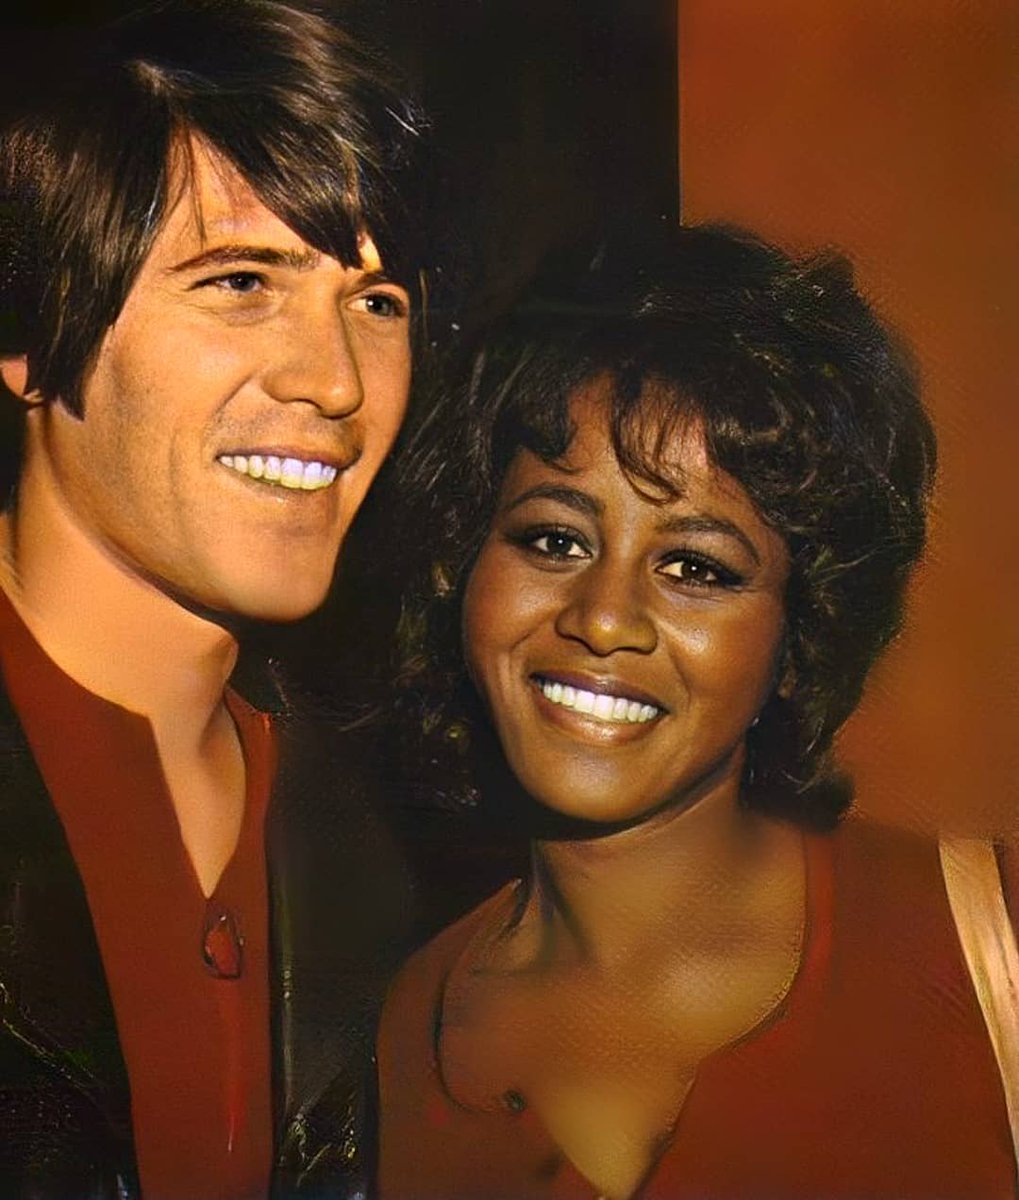 Cindy and her then husband Charles Hewlett. The couple had a son called David, born later that year.❤️

#CindyBirdsong
#TheSupremes 
#Motown 
#Couple